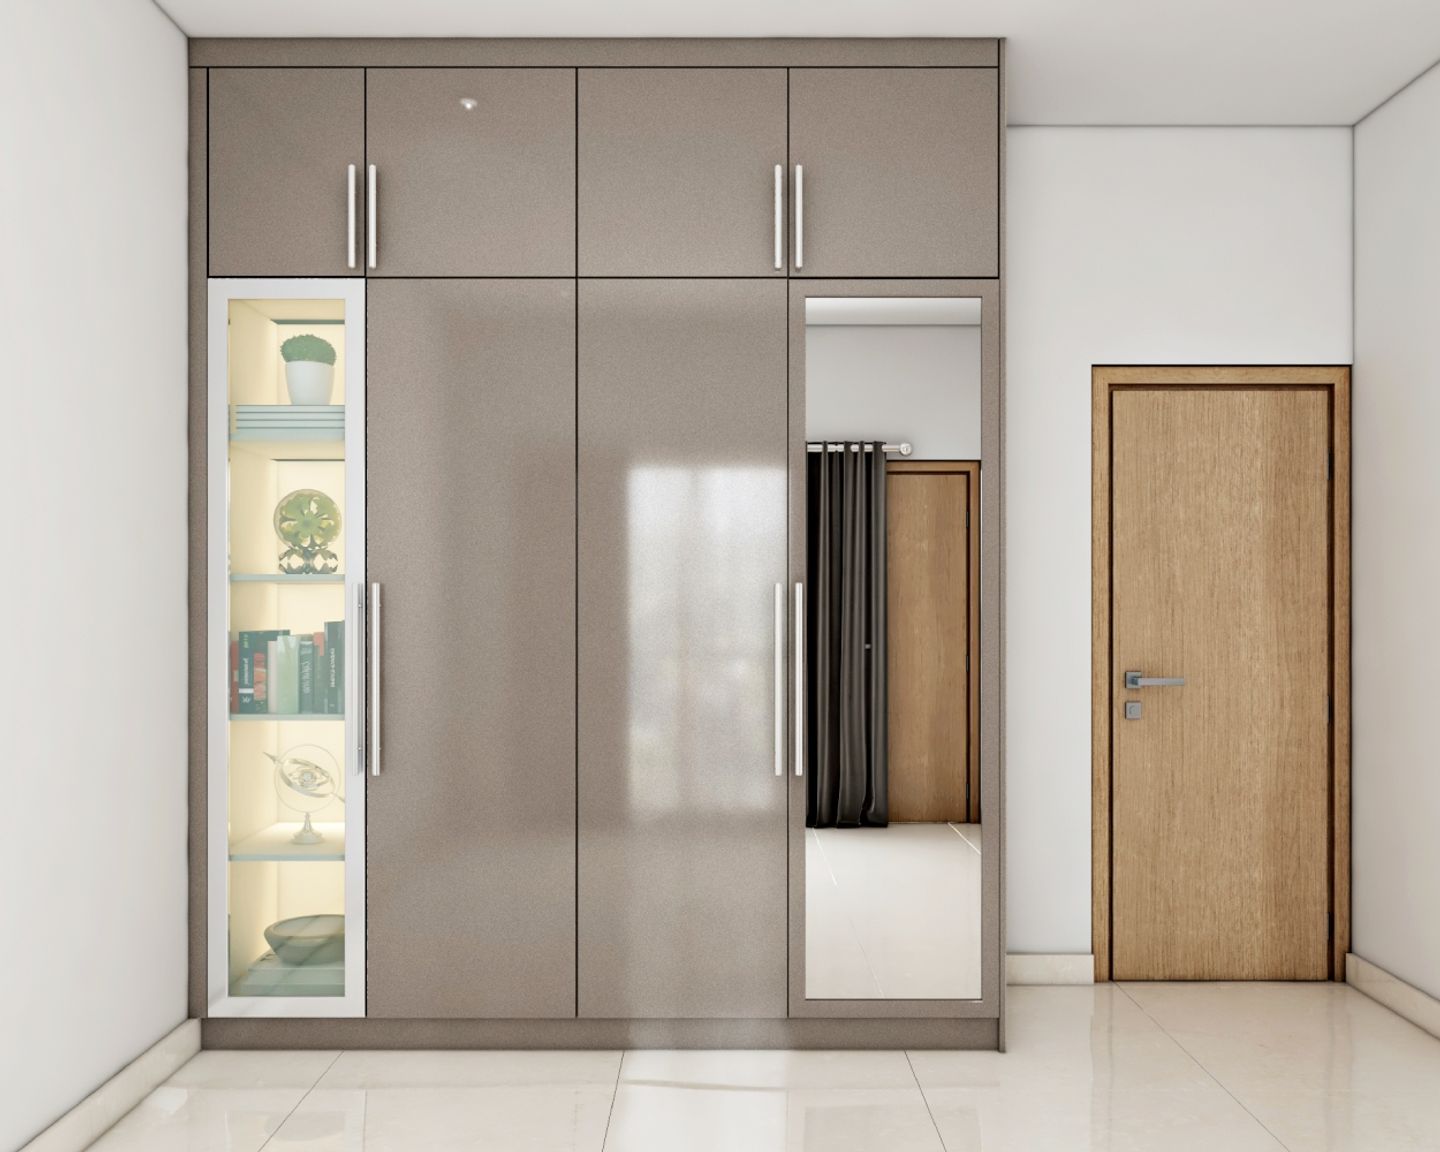 Spacious Glossy Grey 4-Door Swing Wardrobe Design With Mirror, White Glass Storage And Lofts - Livspace